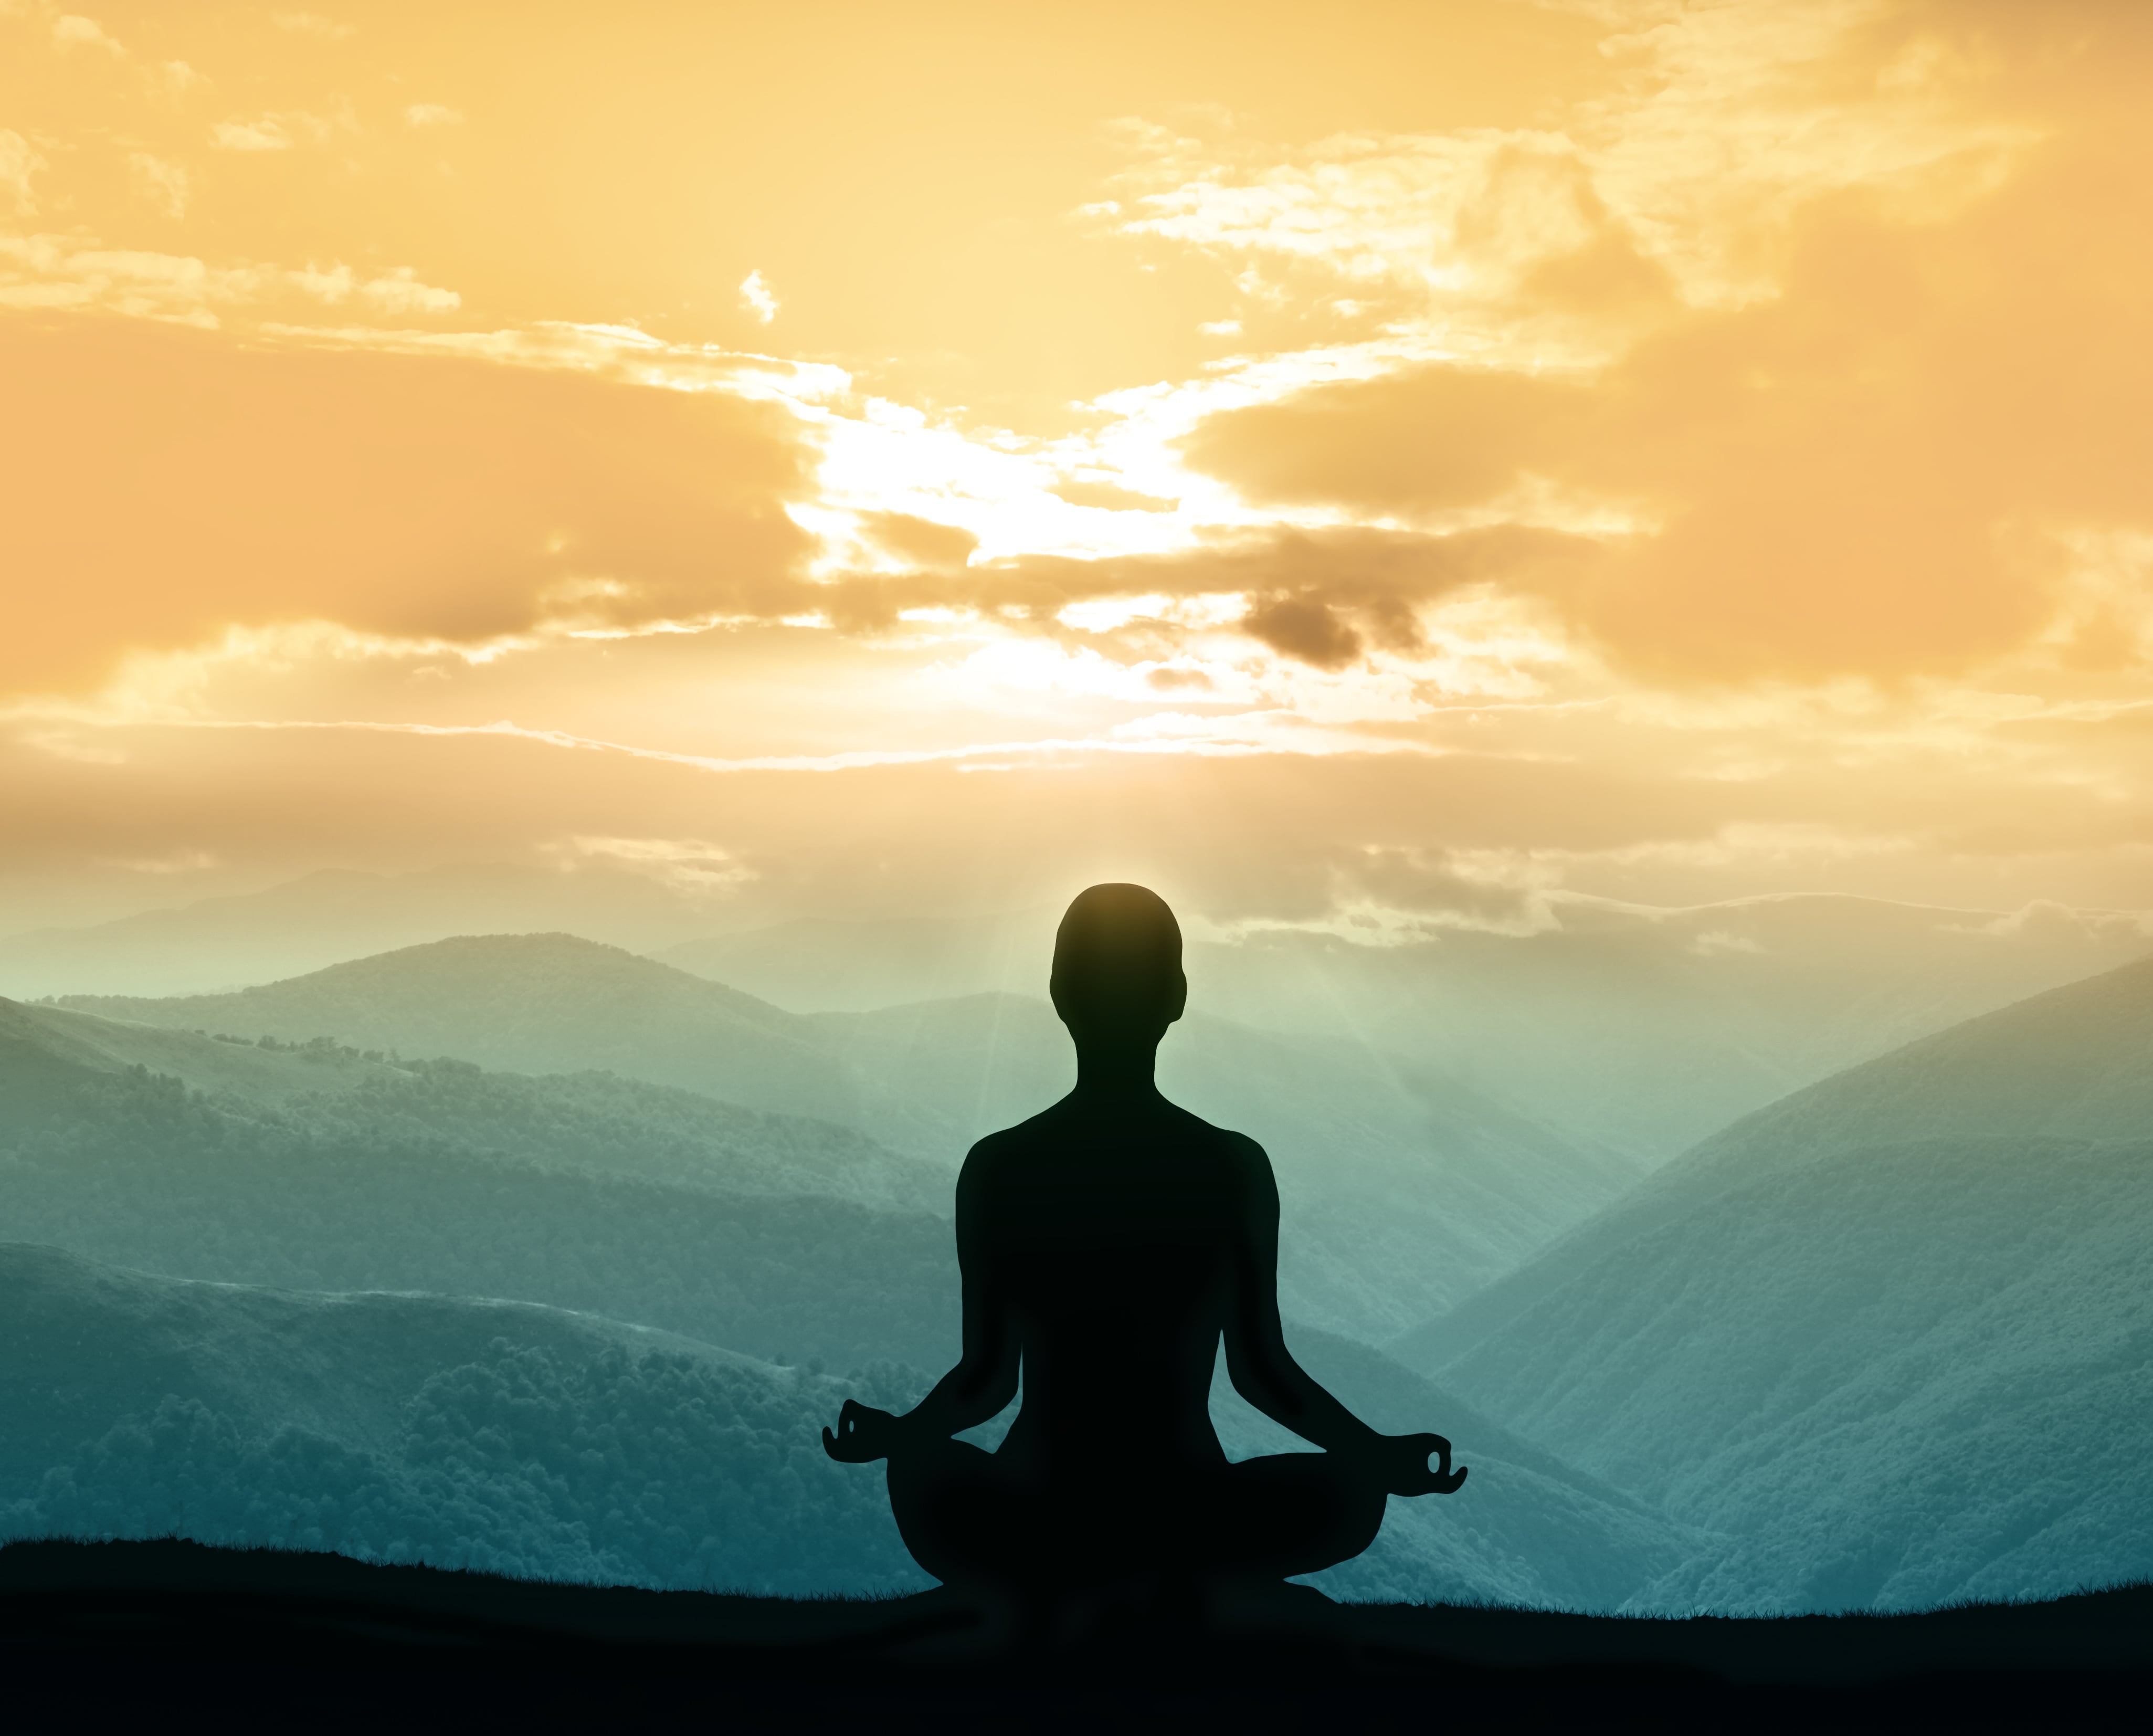 silhouette of person meditating in mountains